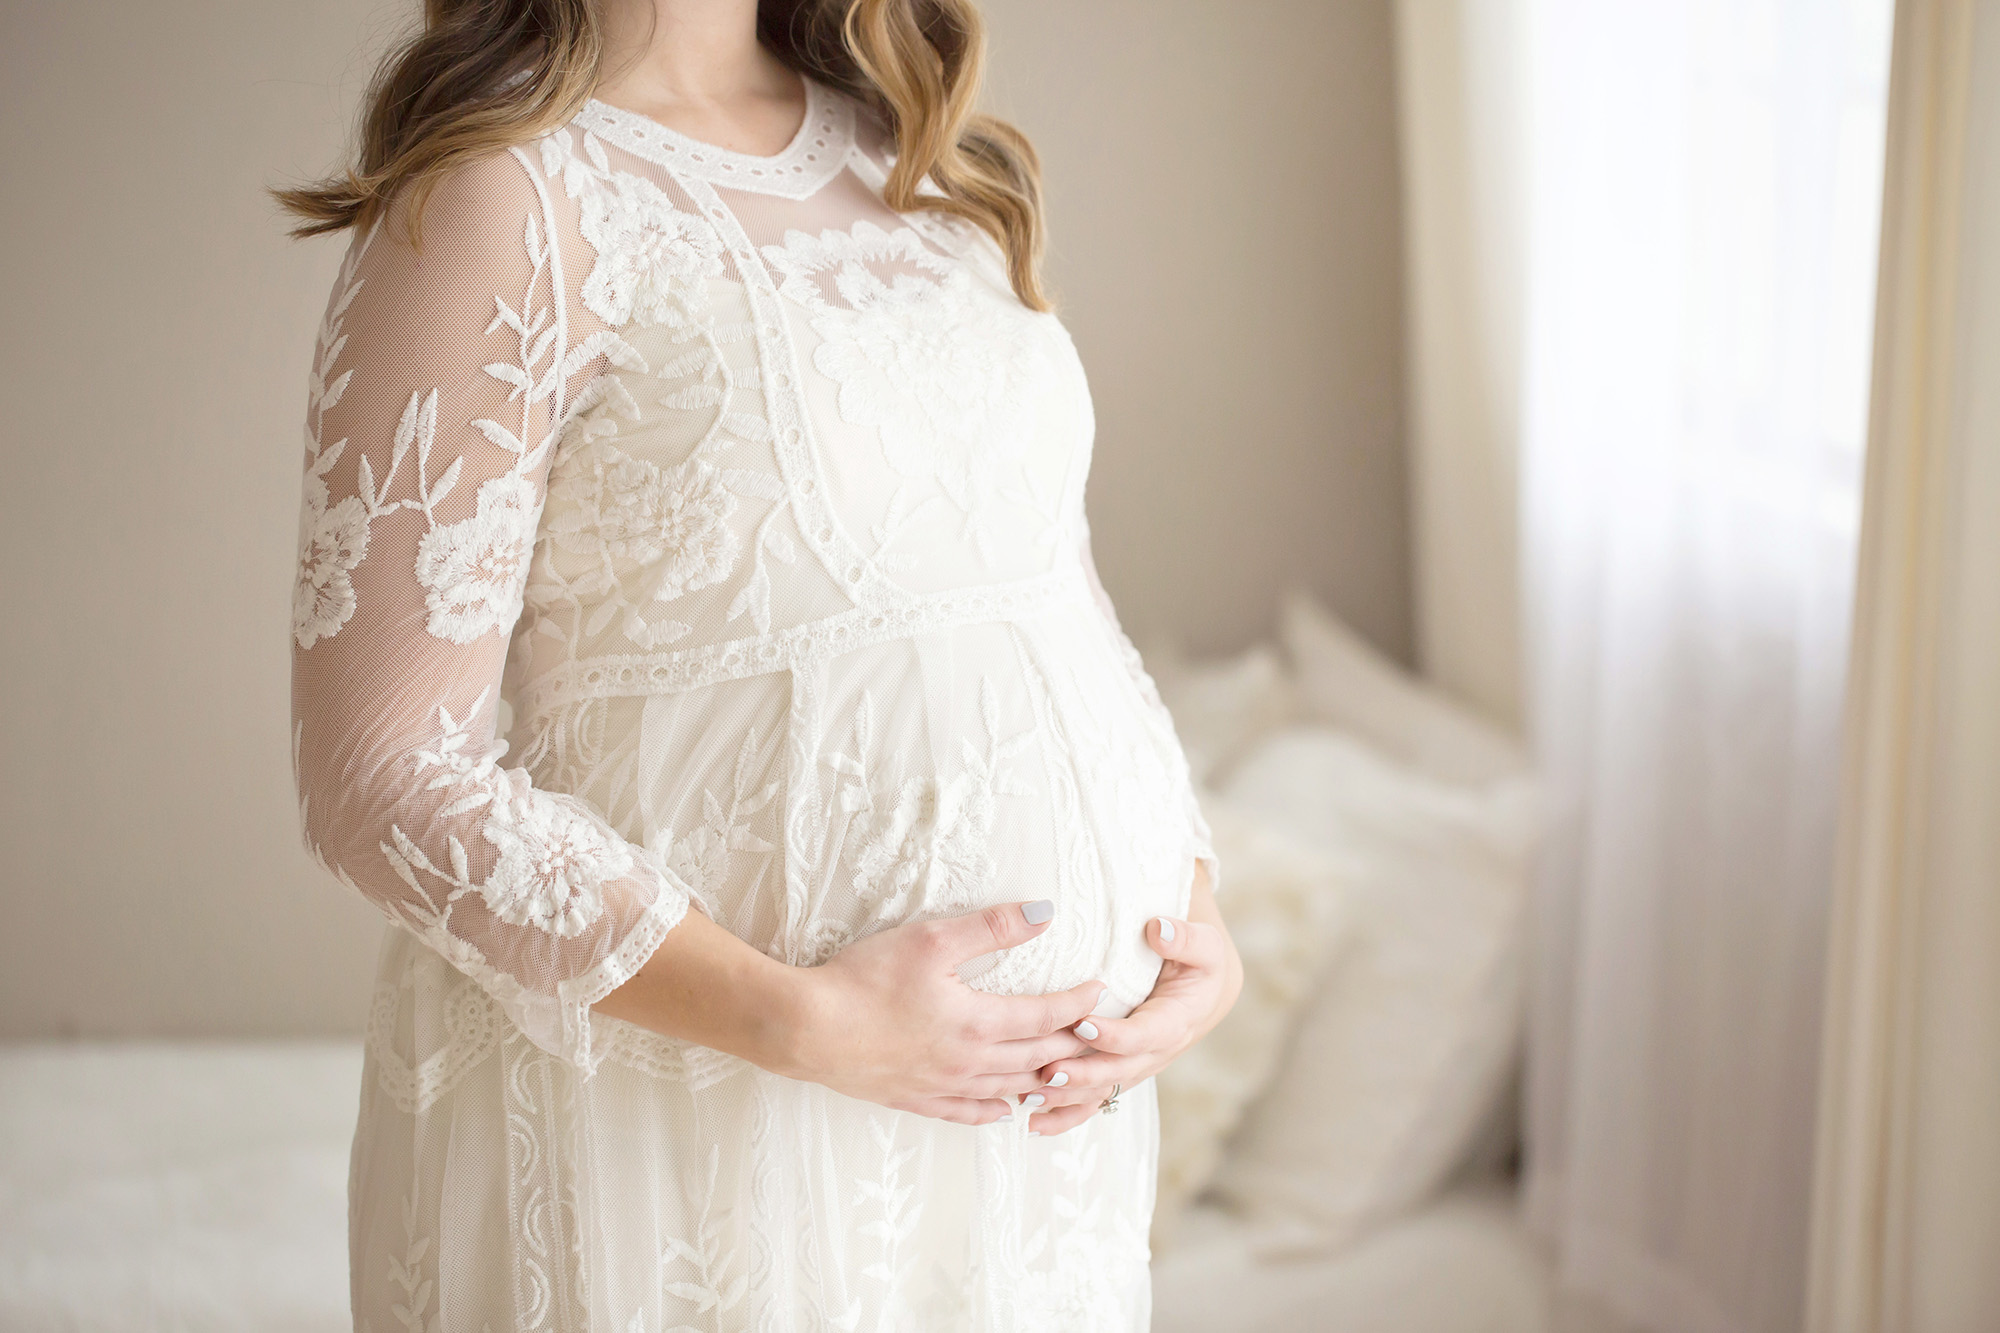 Julie Brock Photography | Louisville KY Maternity Photographer | Louisville KY newborn photographer | Louisville KY Family Photographer | Lace Gown for Maternity Portraits | Sincerely Quinley